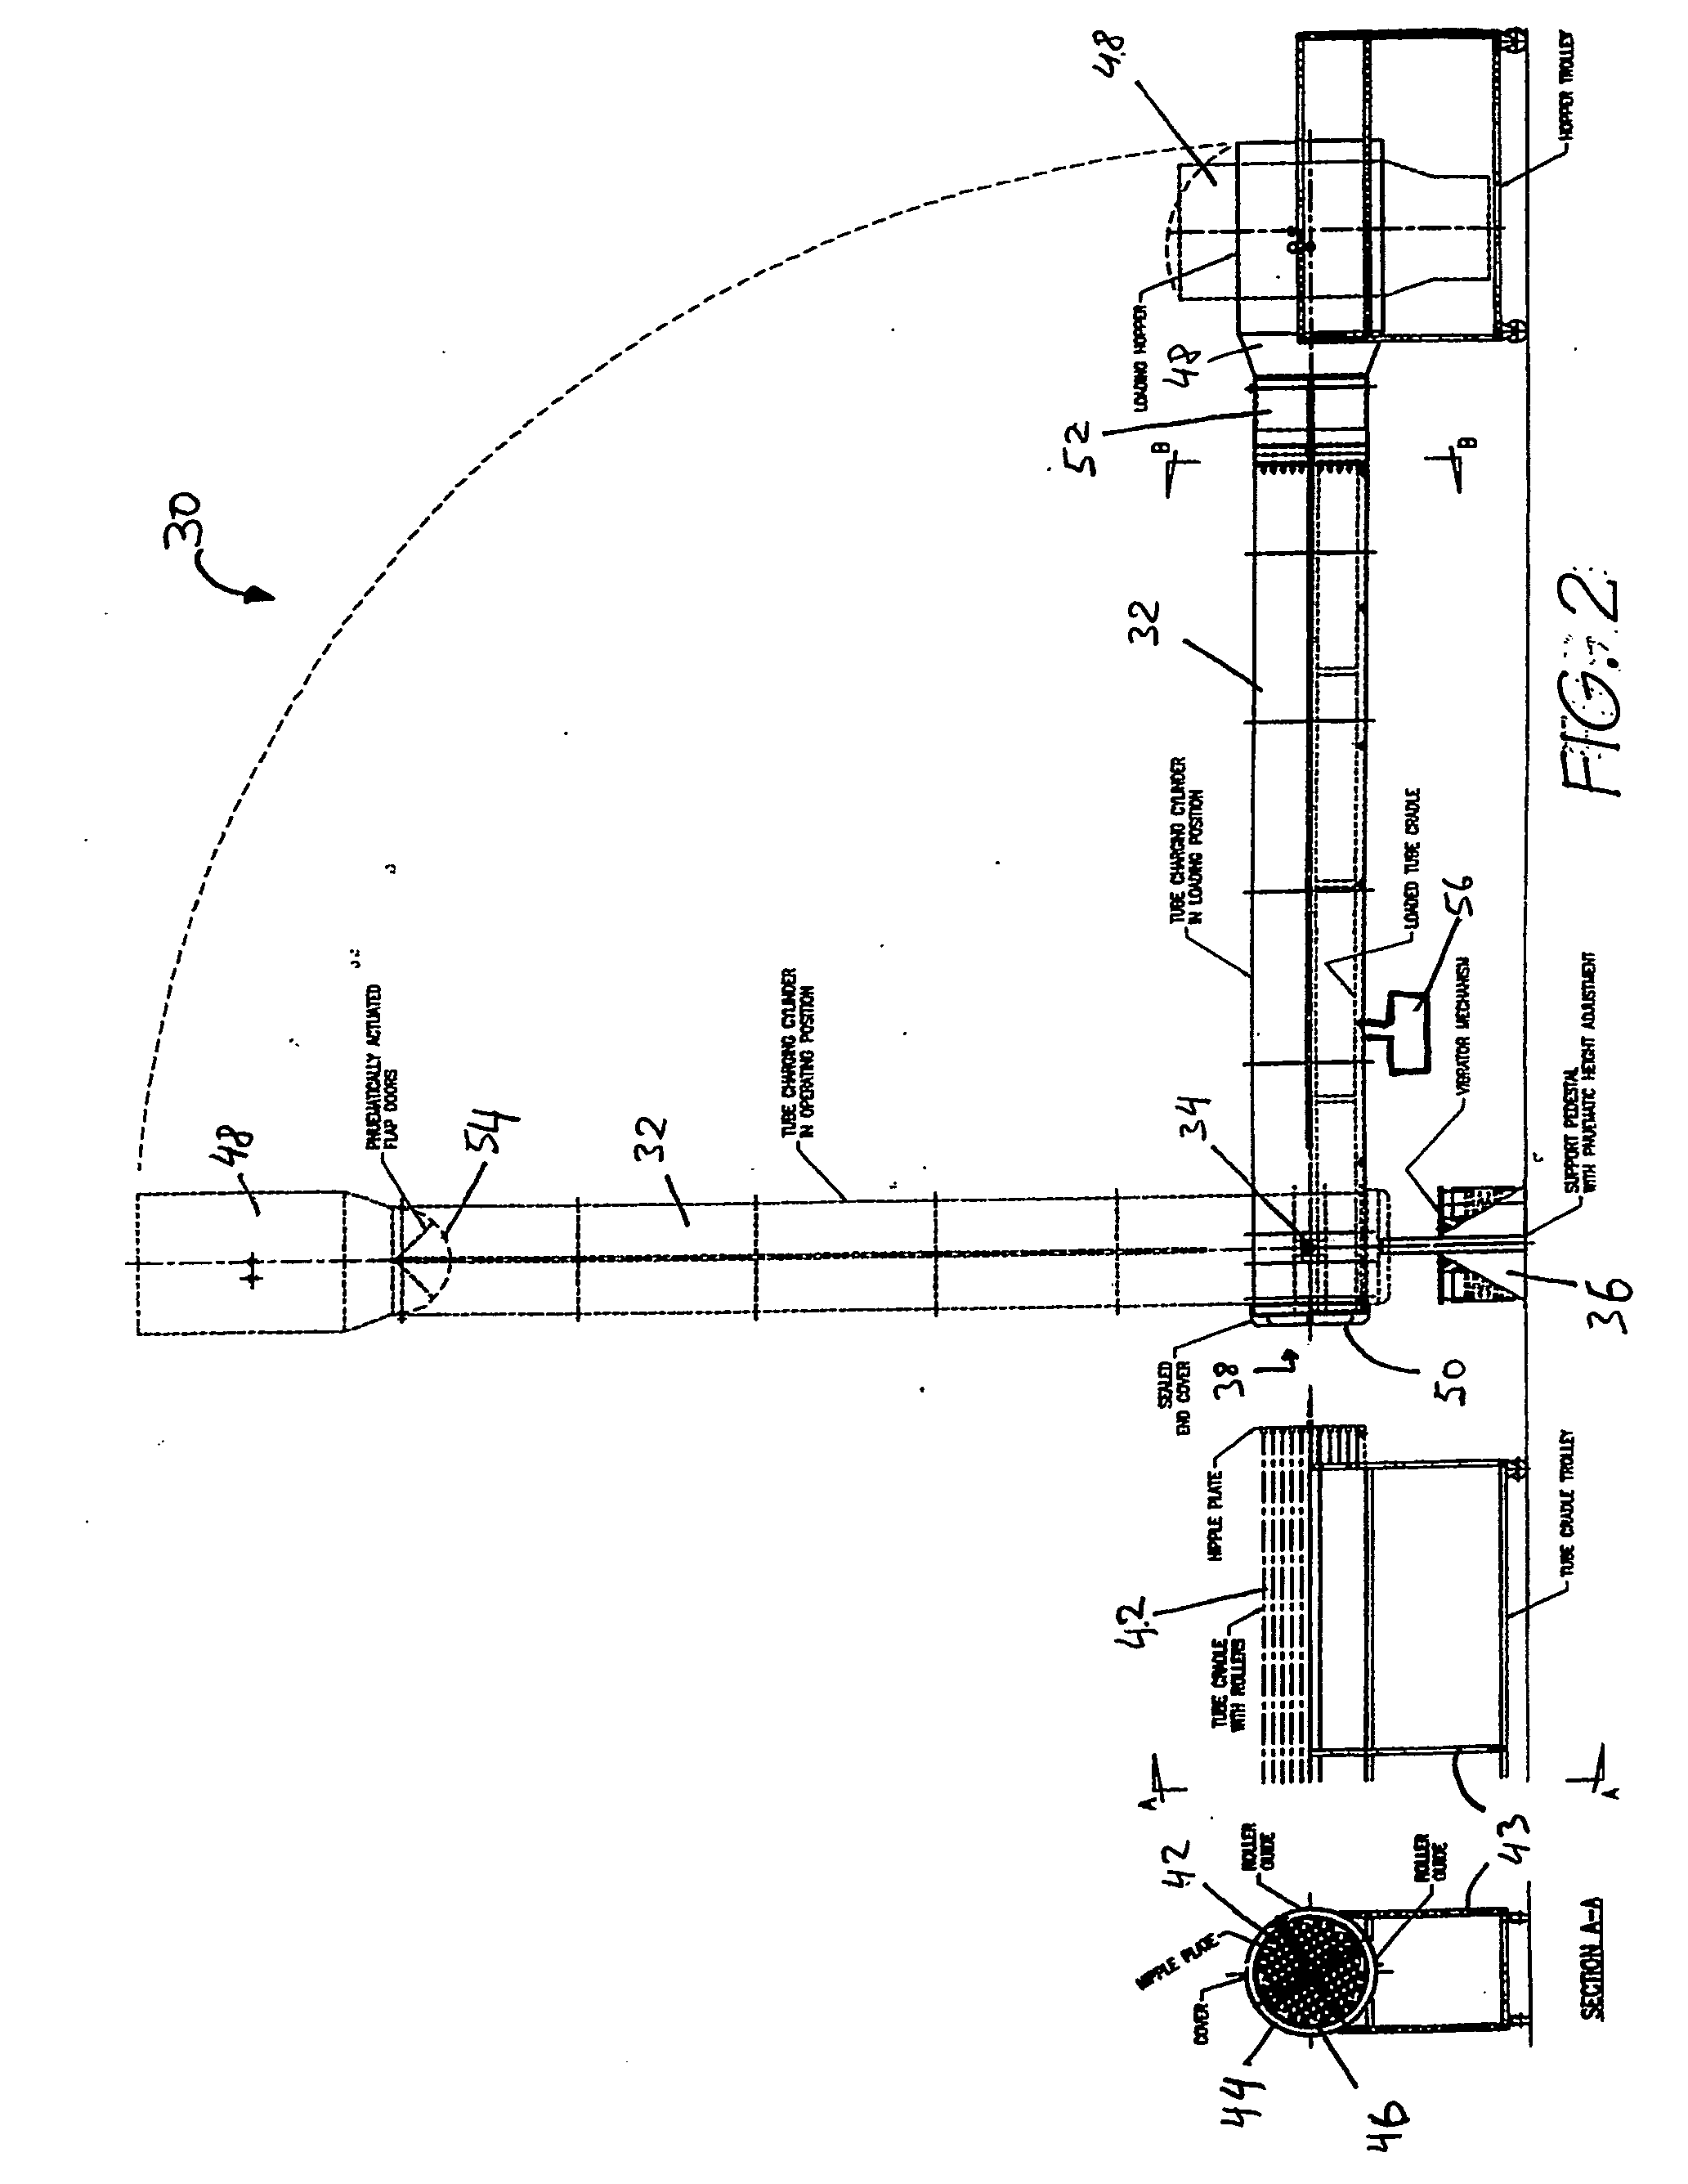 Method of charging a container with an energetic material